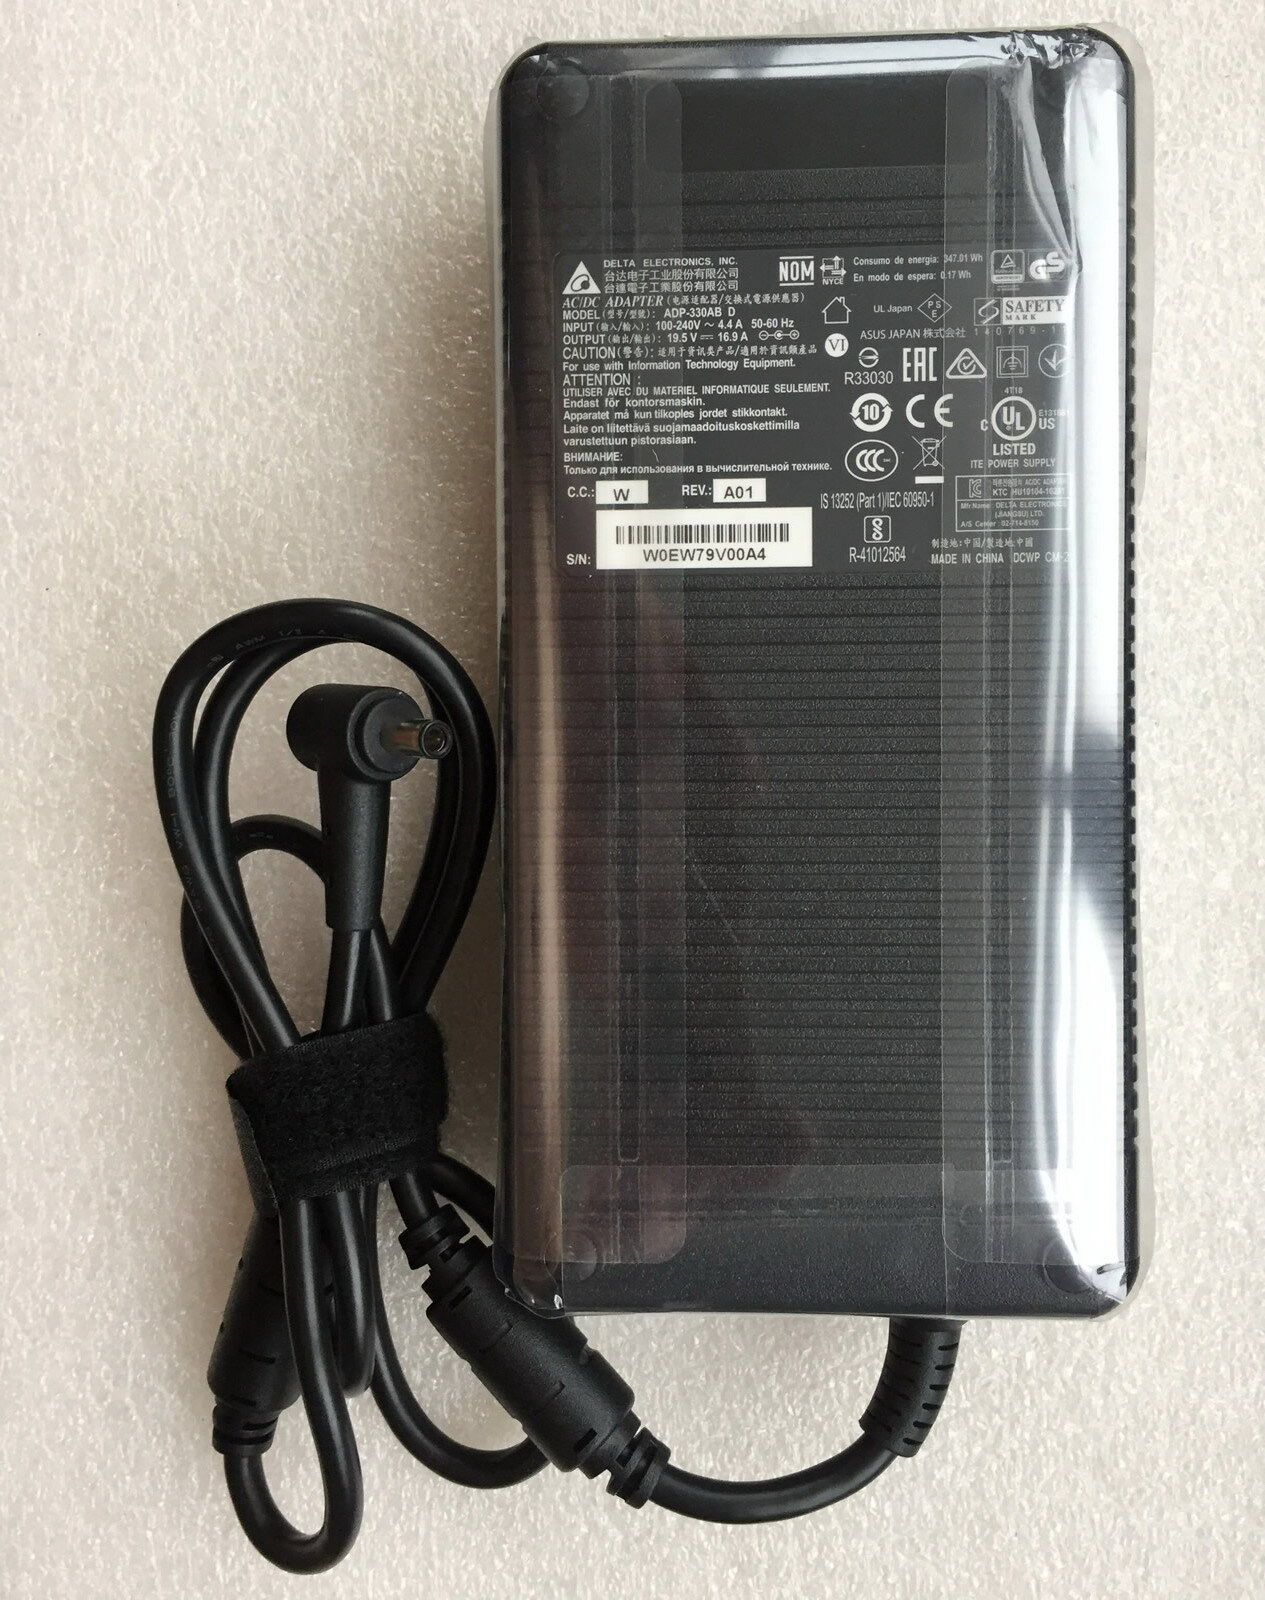 New ASUS ROG GX501V GM501 G752 GS8750 ac adapter 19.5v 16.9a 330W ADP-330AB D laptop ac adapter 6.0*3.7mm - Click Image to Close